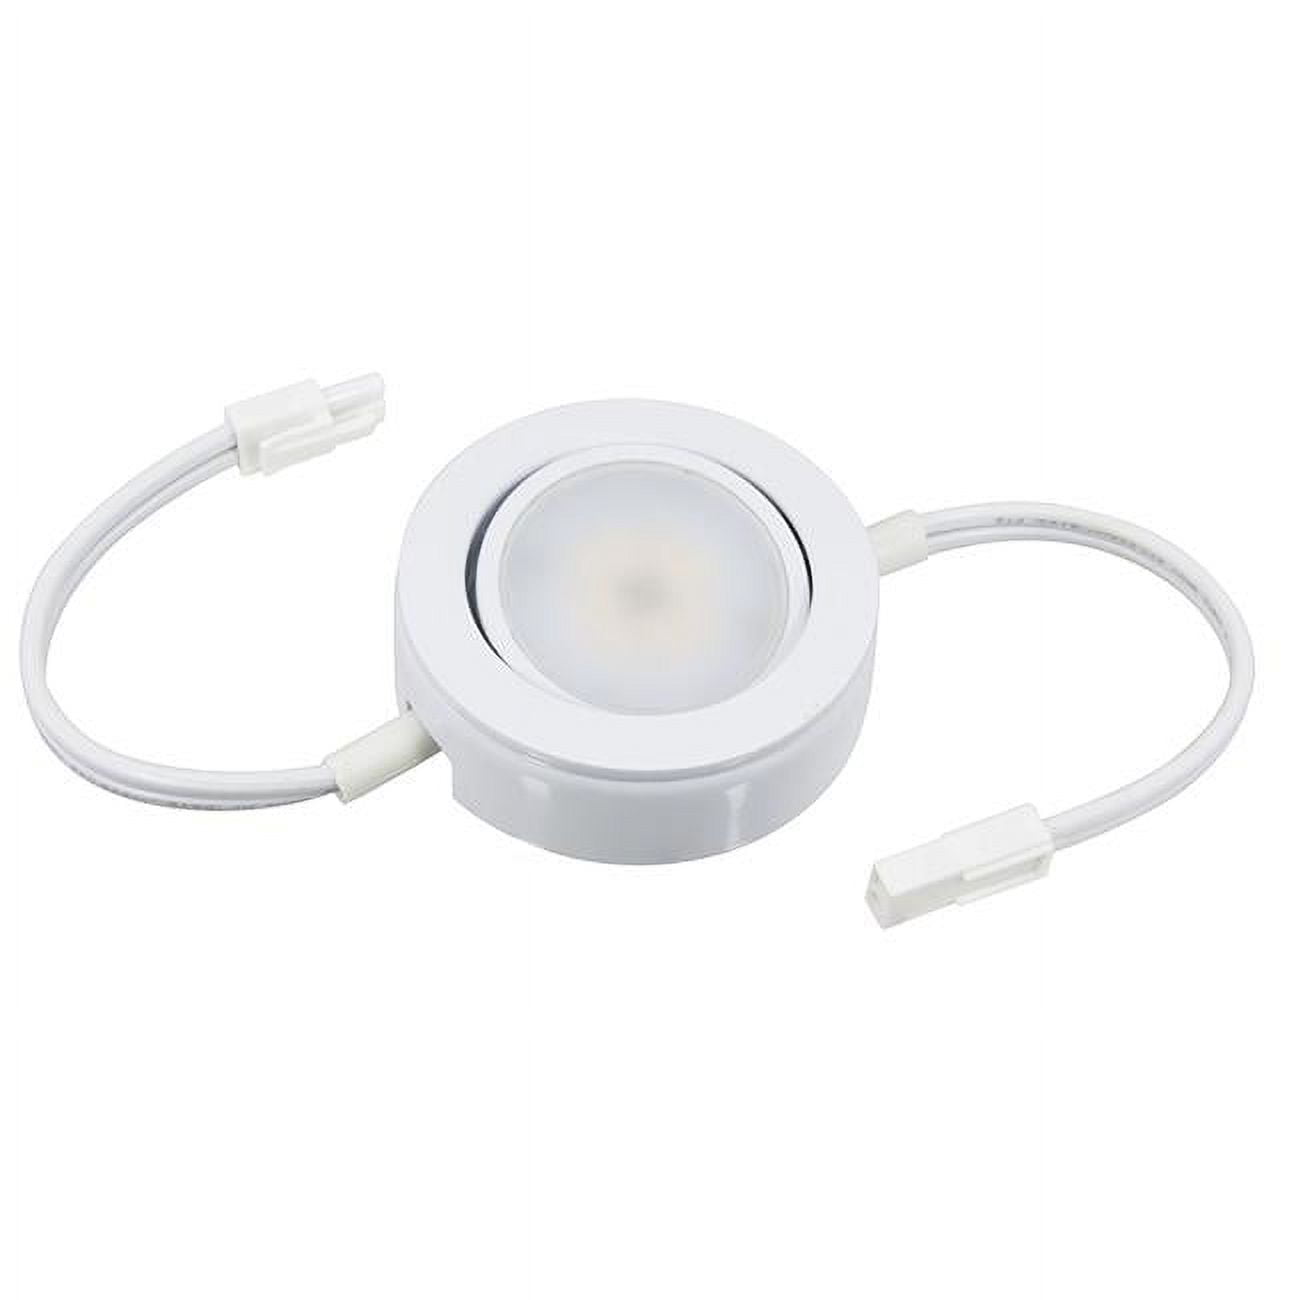 Americanlighting Mvp-1-wh-b Dimmable Led Puck Light With 6 In. Lead Wire, 6 In. Tail Wire & Mounting Screws, 120 V Ac, 4 Watt - White